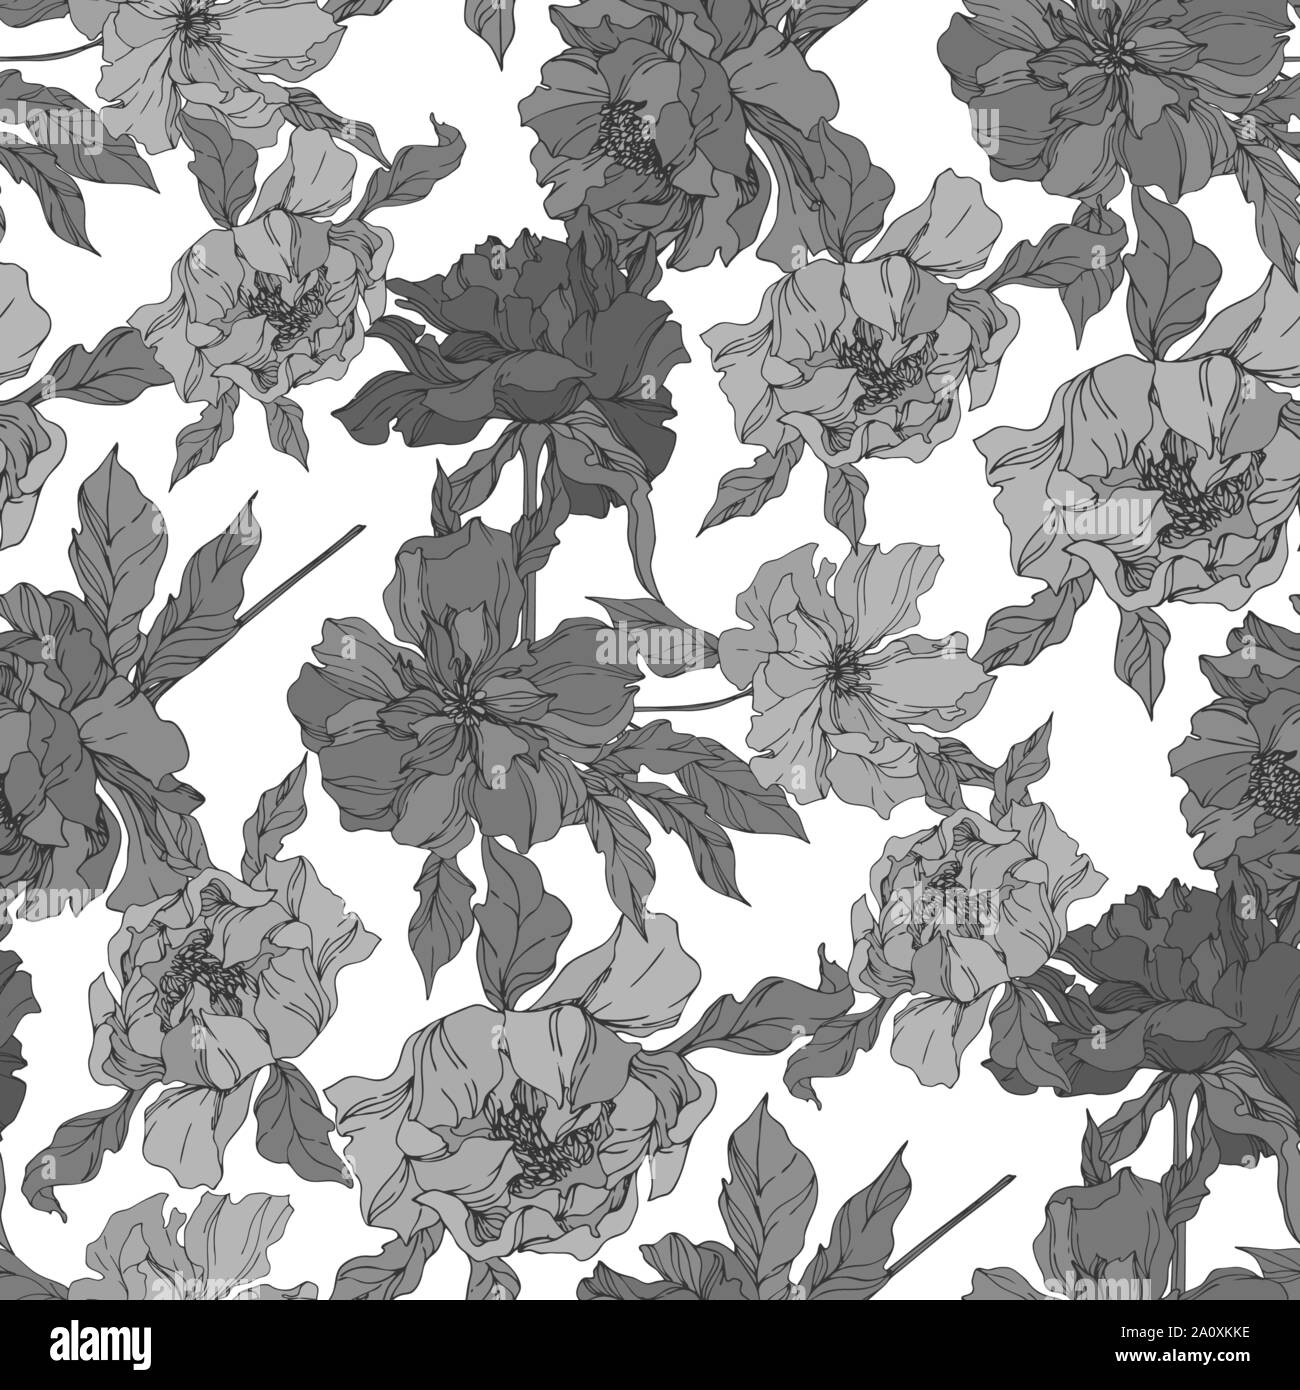 Peony floral botanical flowers. Wild spring leaf wildflower isolated. Black and white engraved ink art. Seamless background pattern. Fabric wallpaper Stock Vector